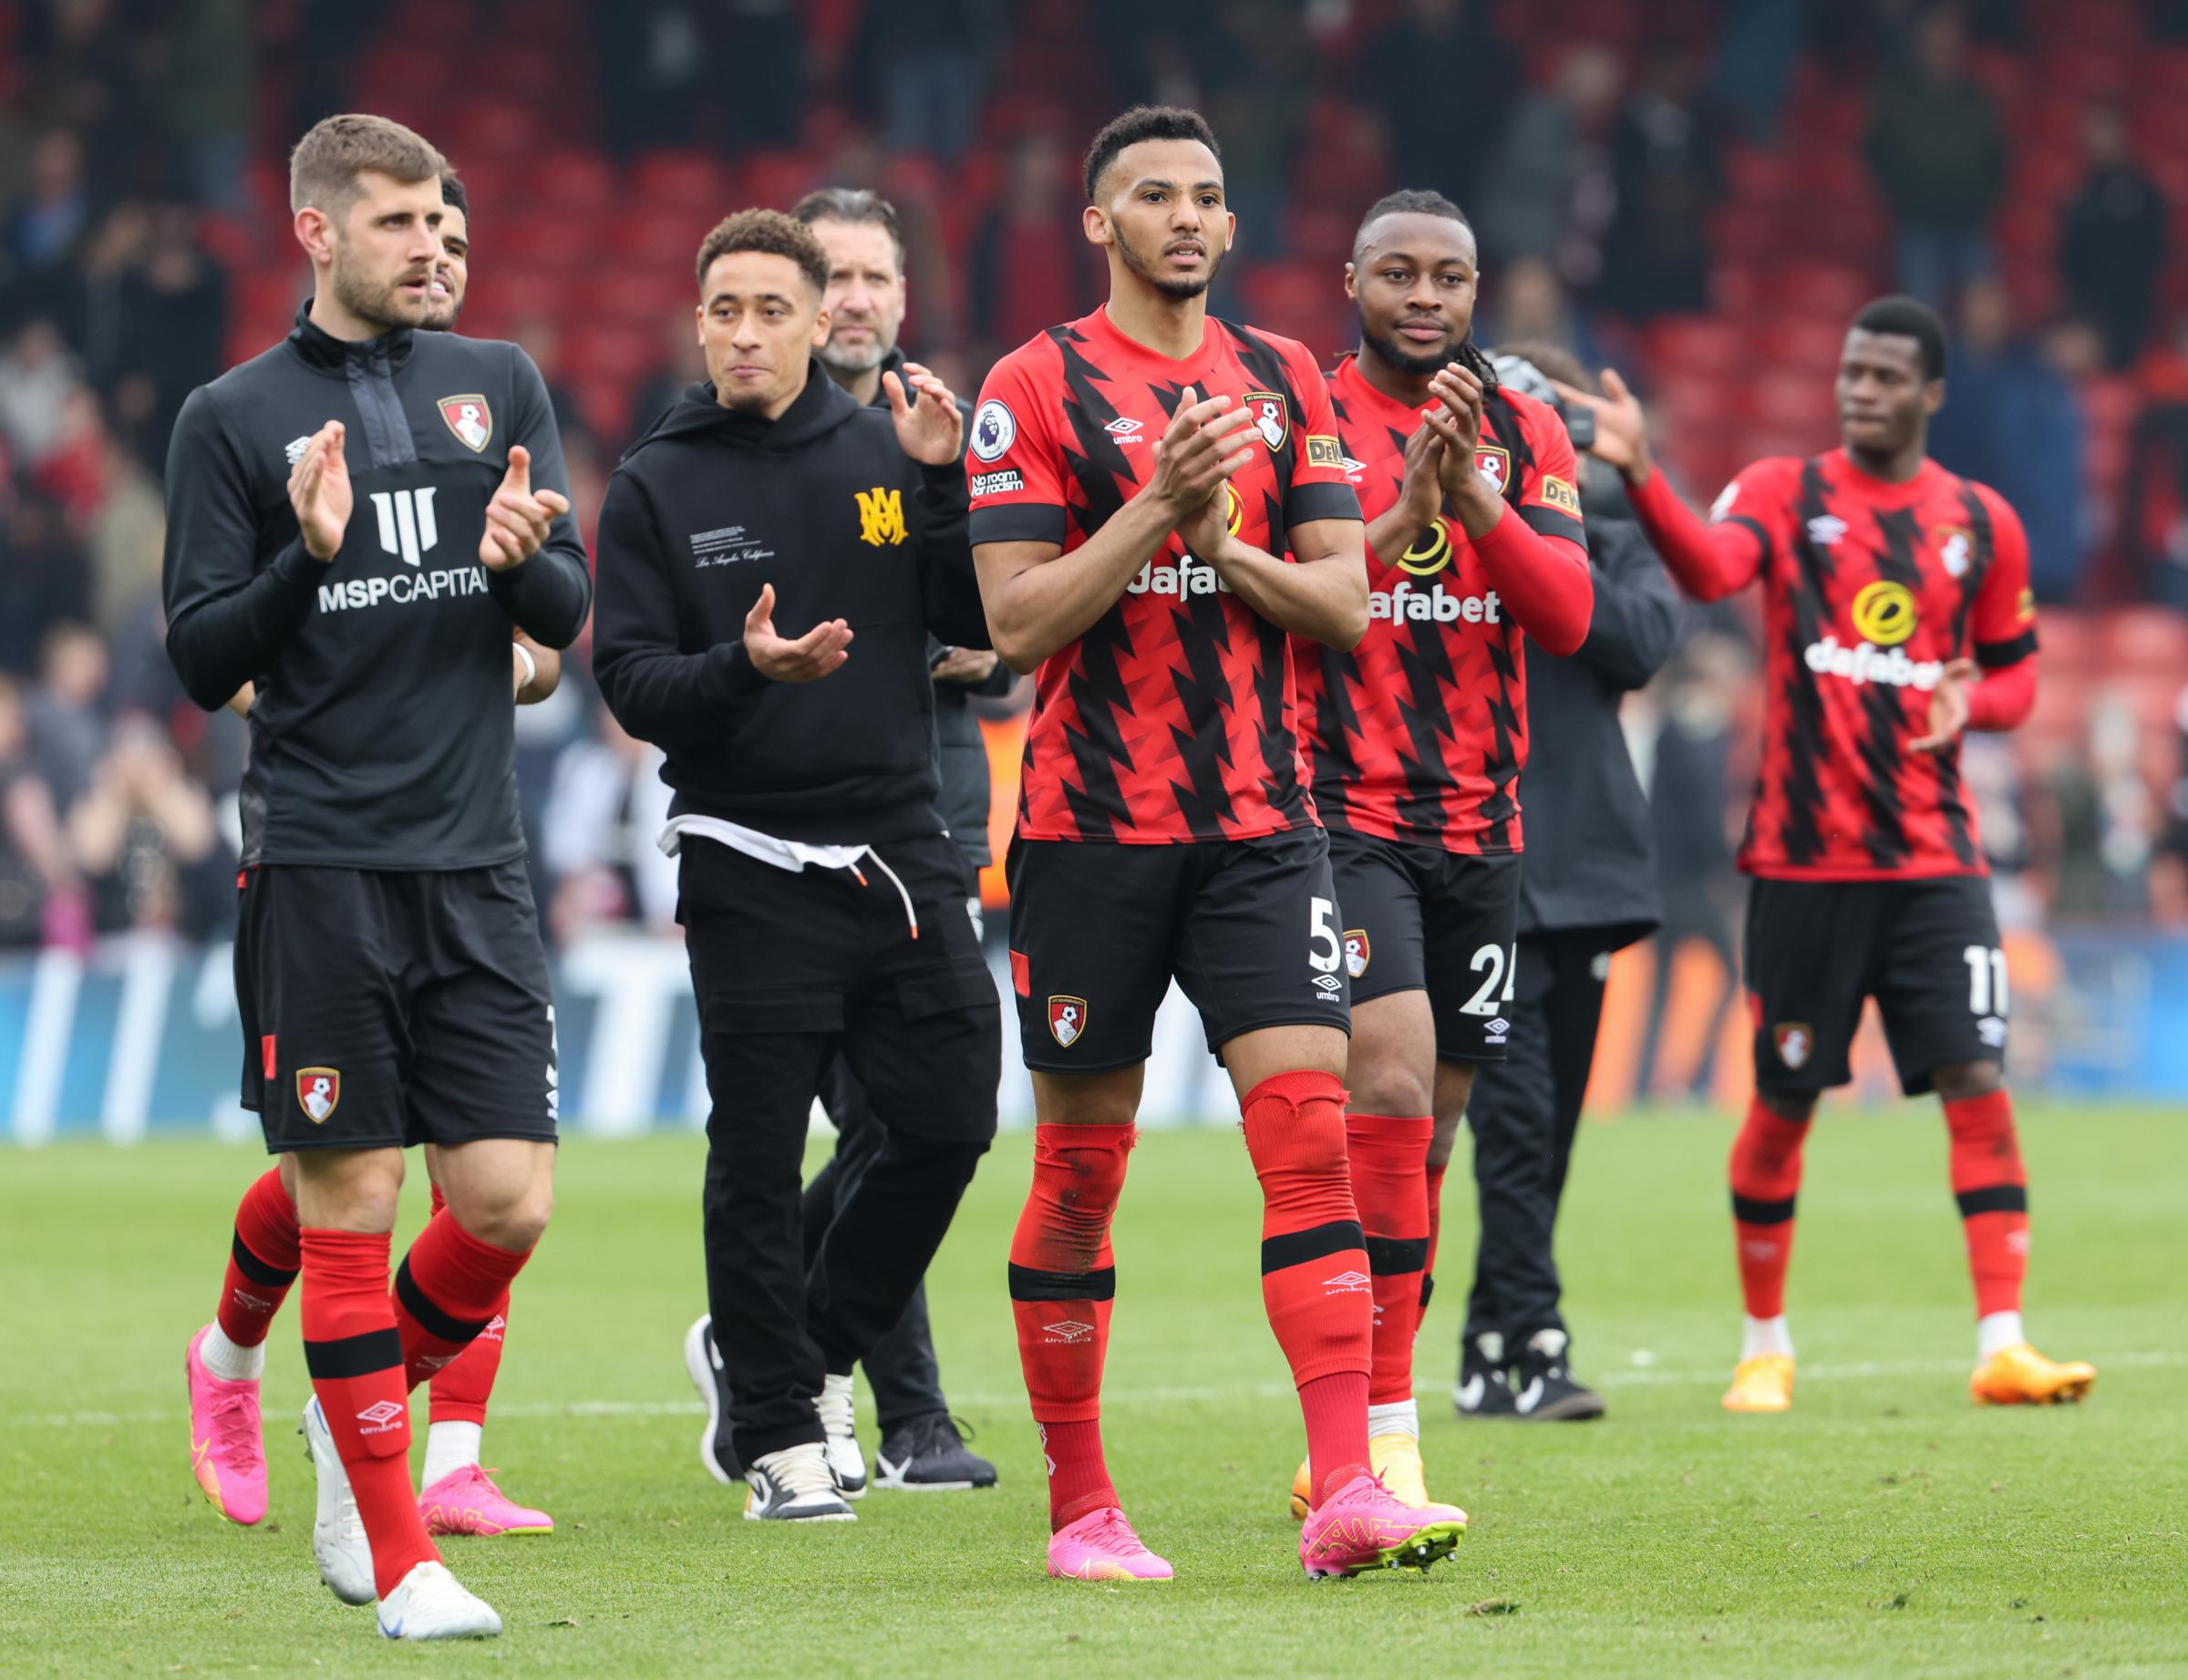 Gary O'Neil on if Bournemouth now feel they 'belong' in Premier League